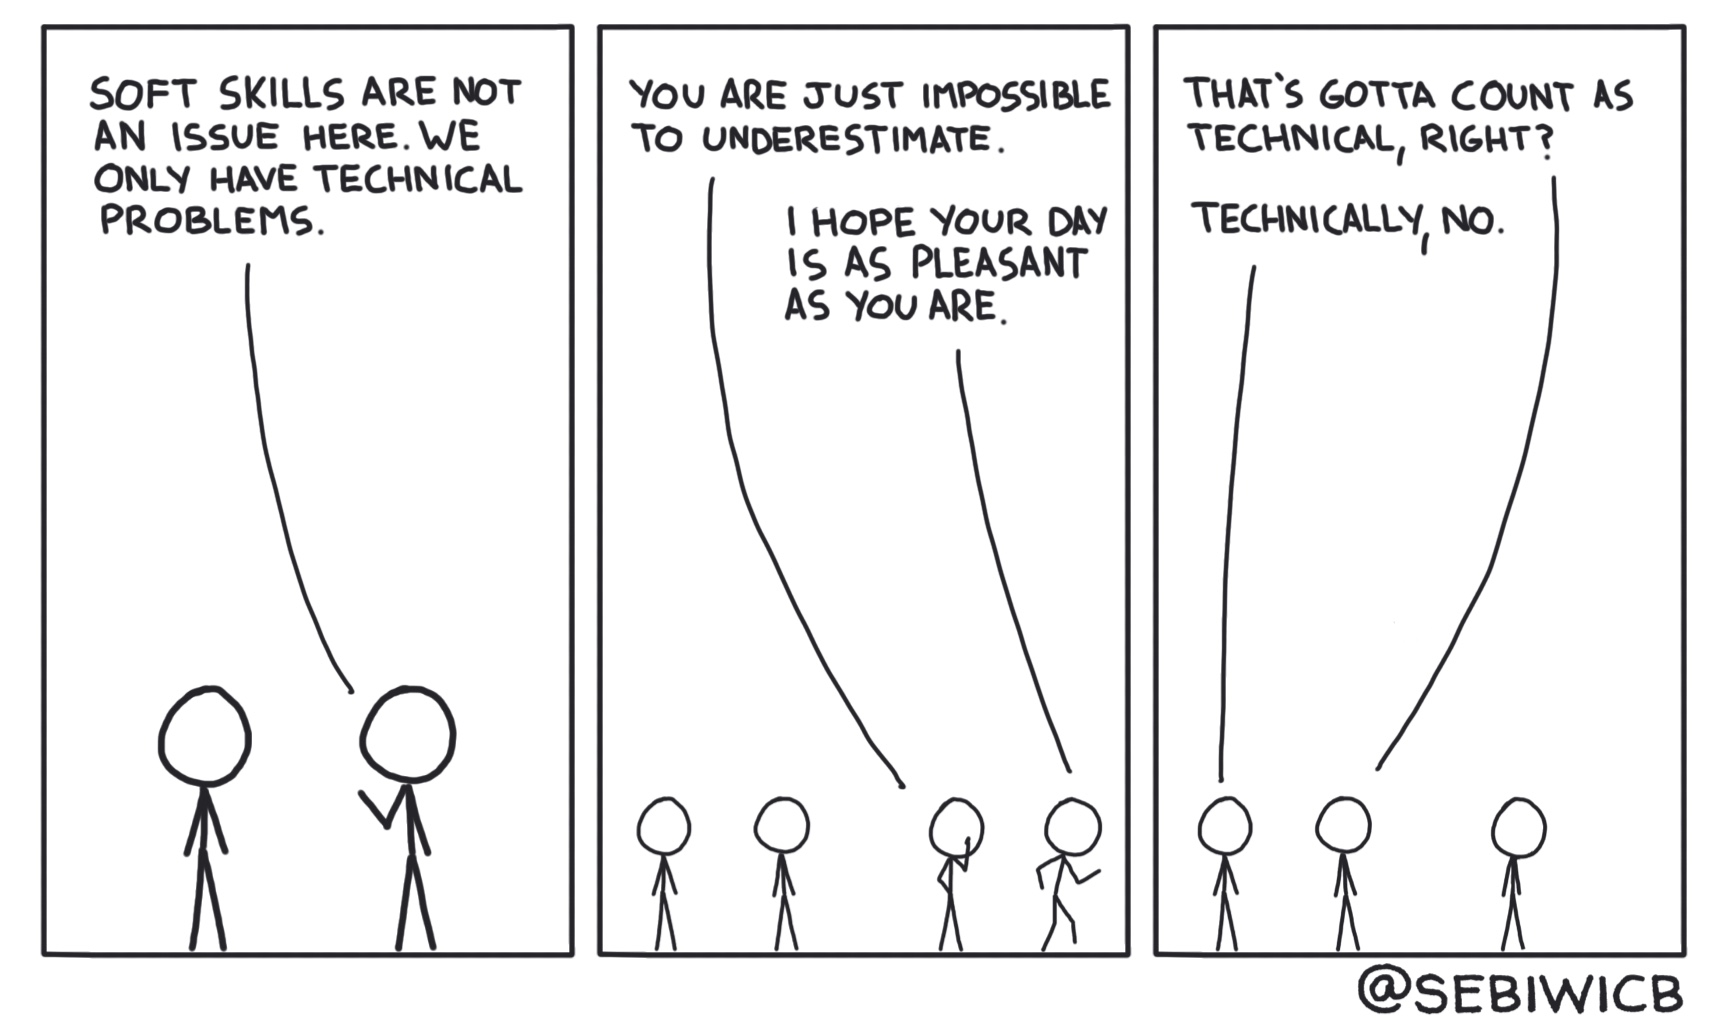 Often, people think all of their problems are technical. Most of the time, they're not.